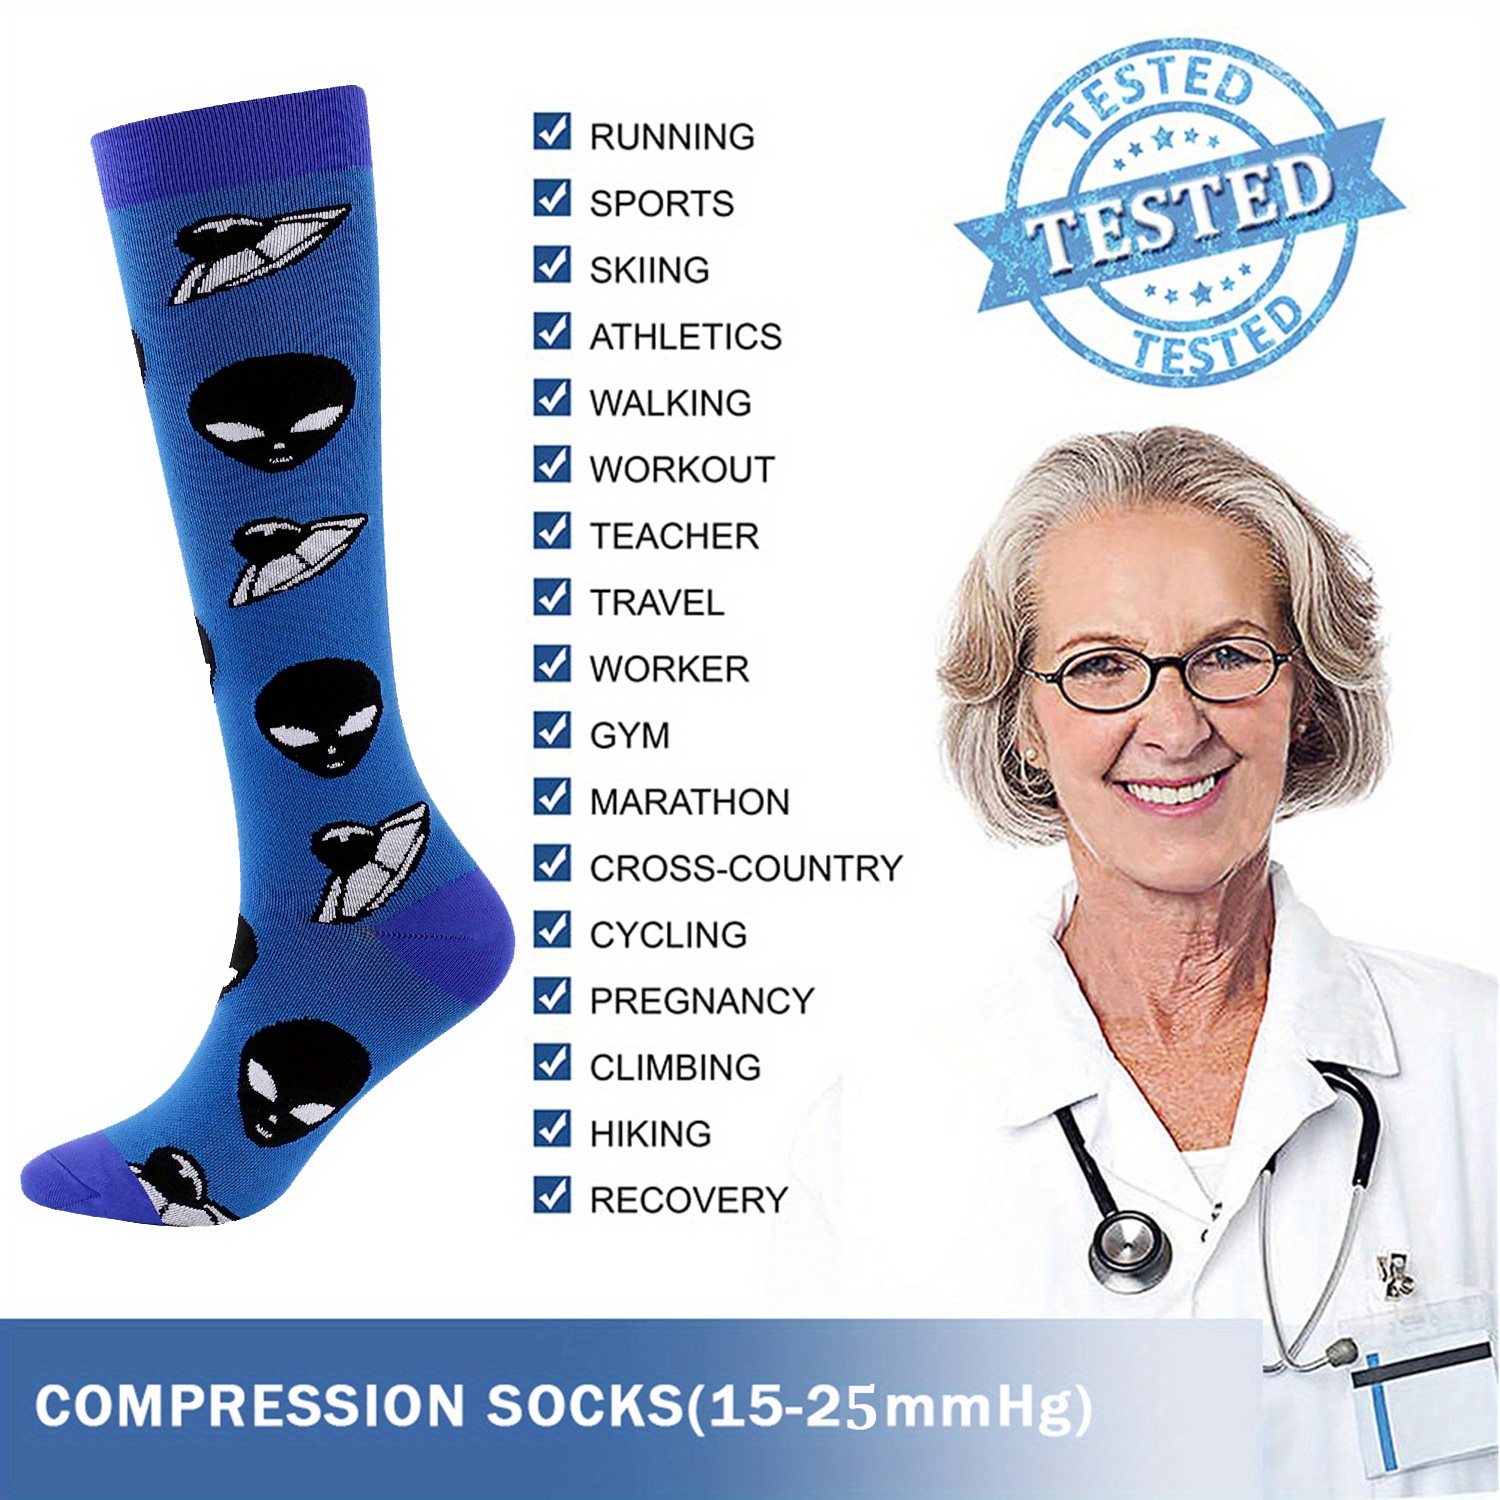 Premium Care, Outdoor, and Sports Socks